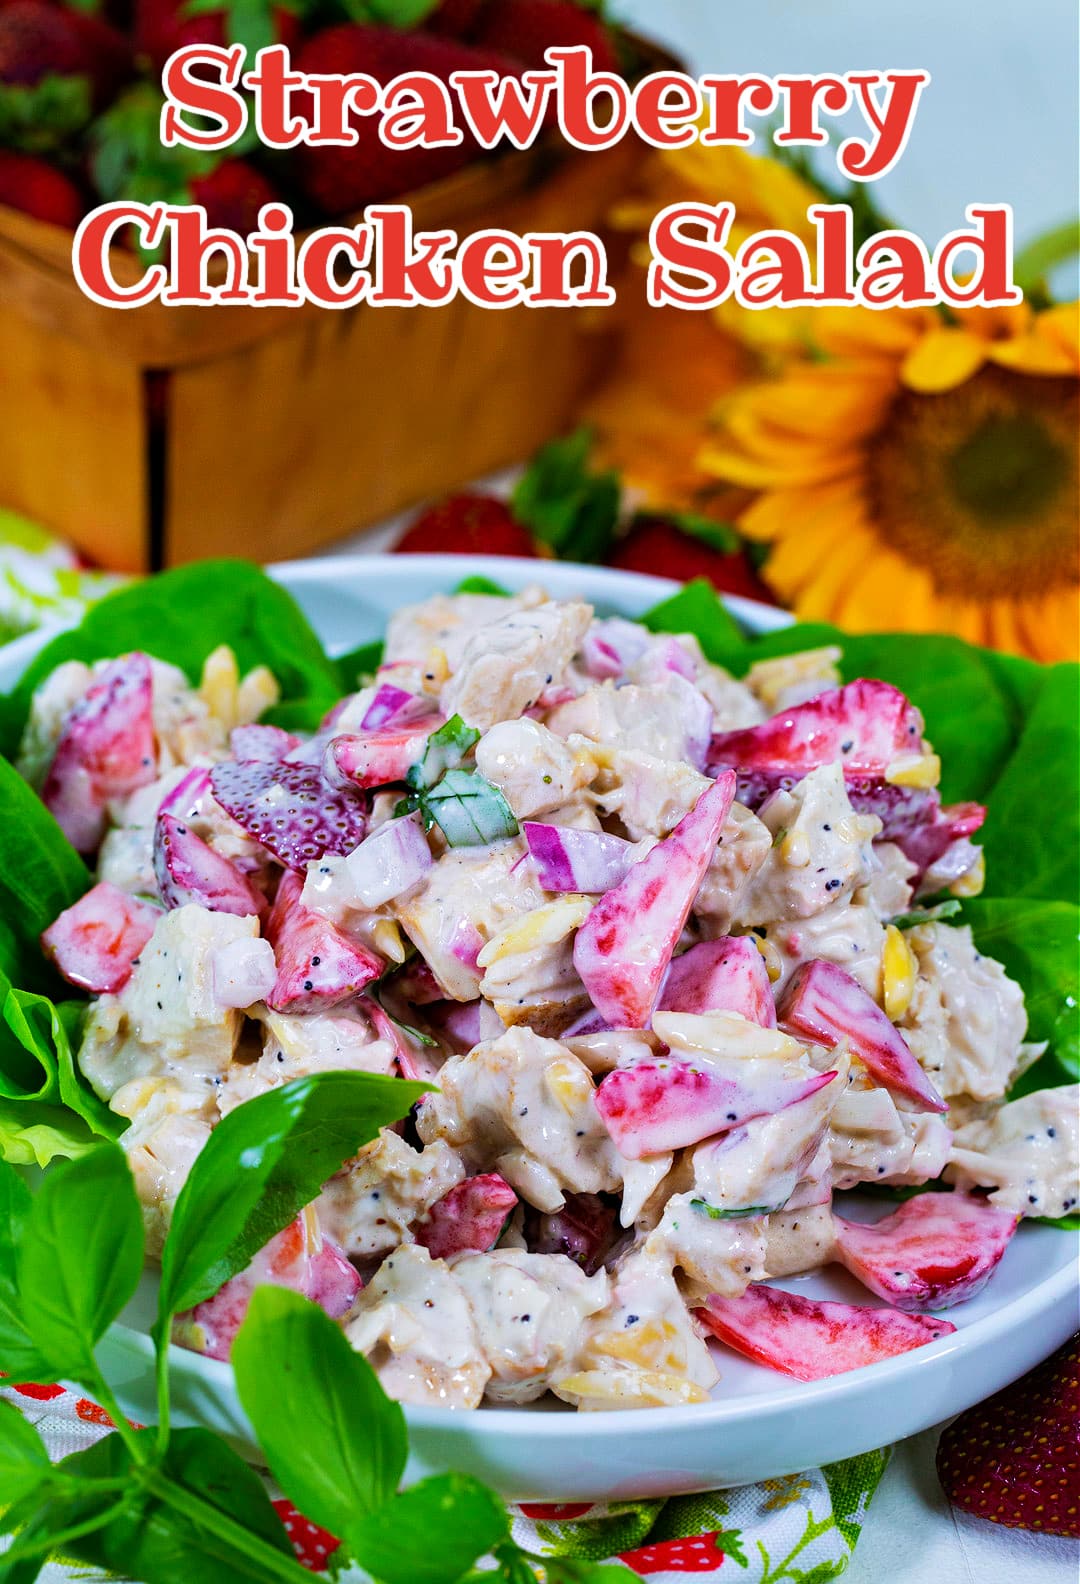 Chicken Salad with Strawberries on a bed of lettuce